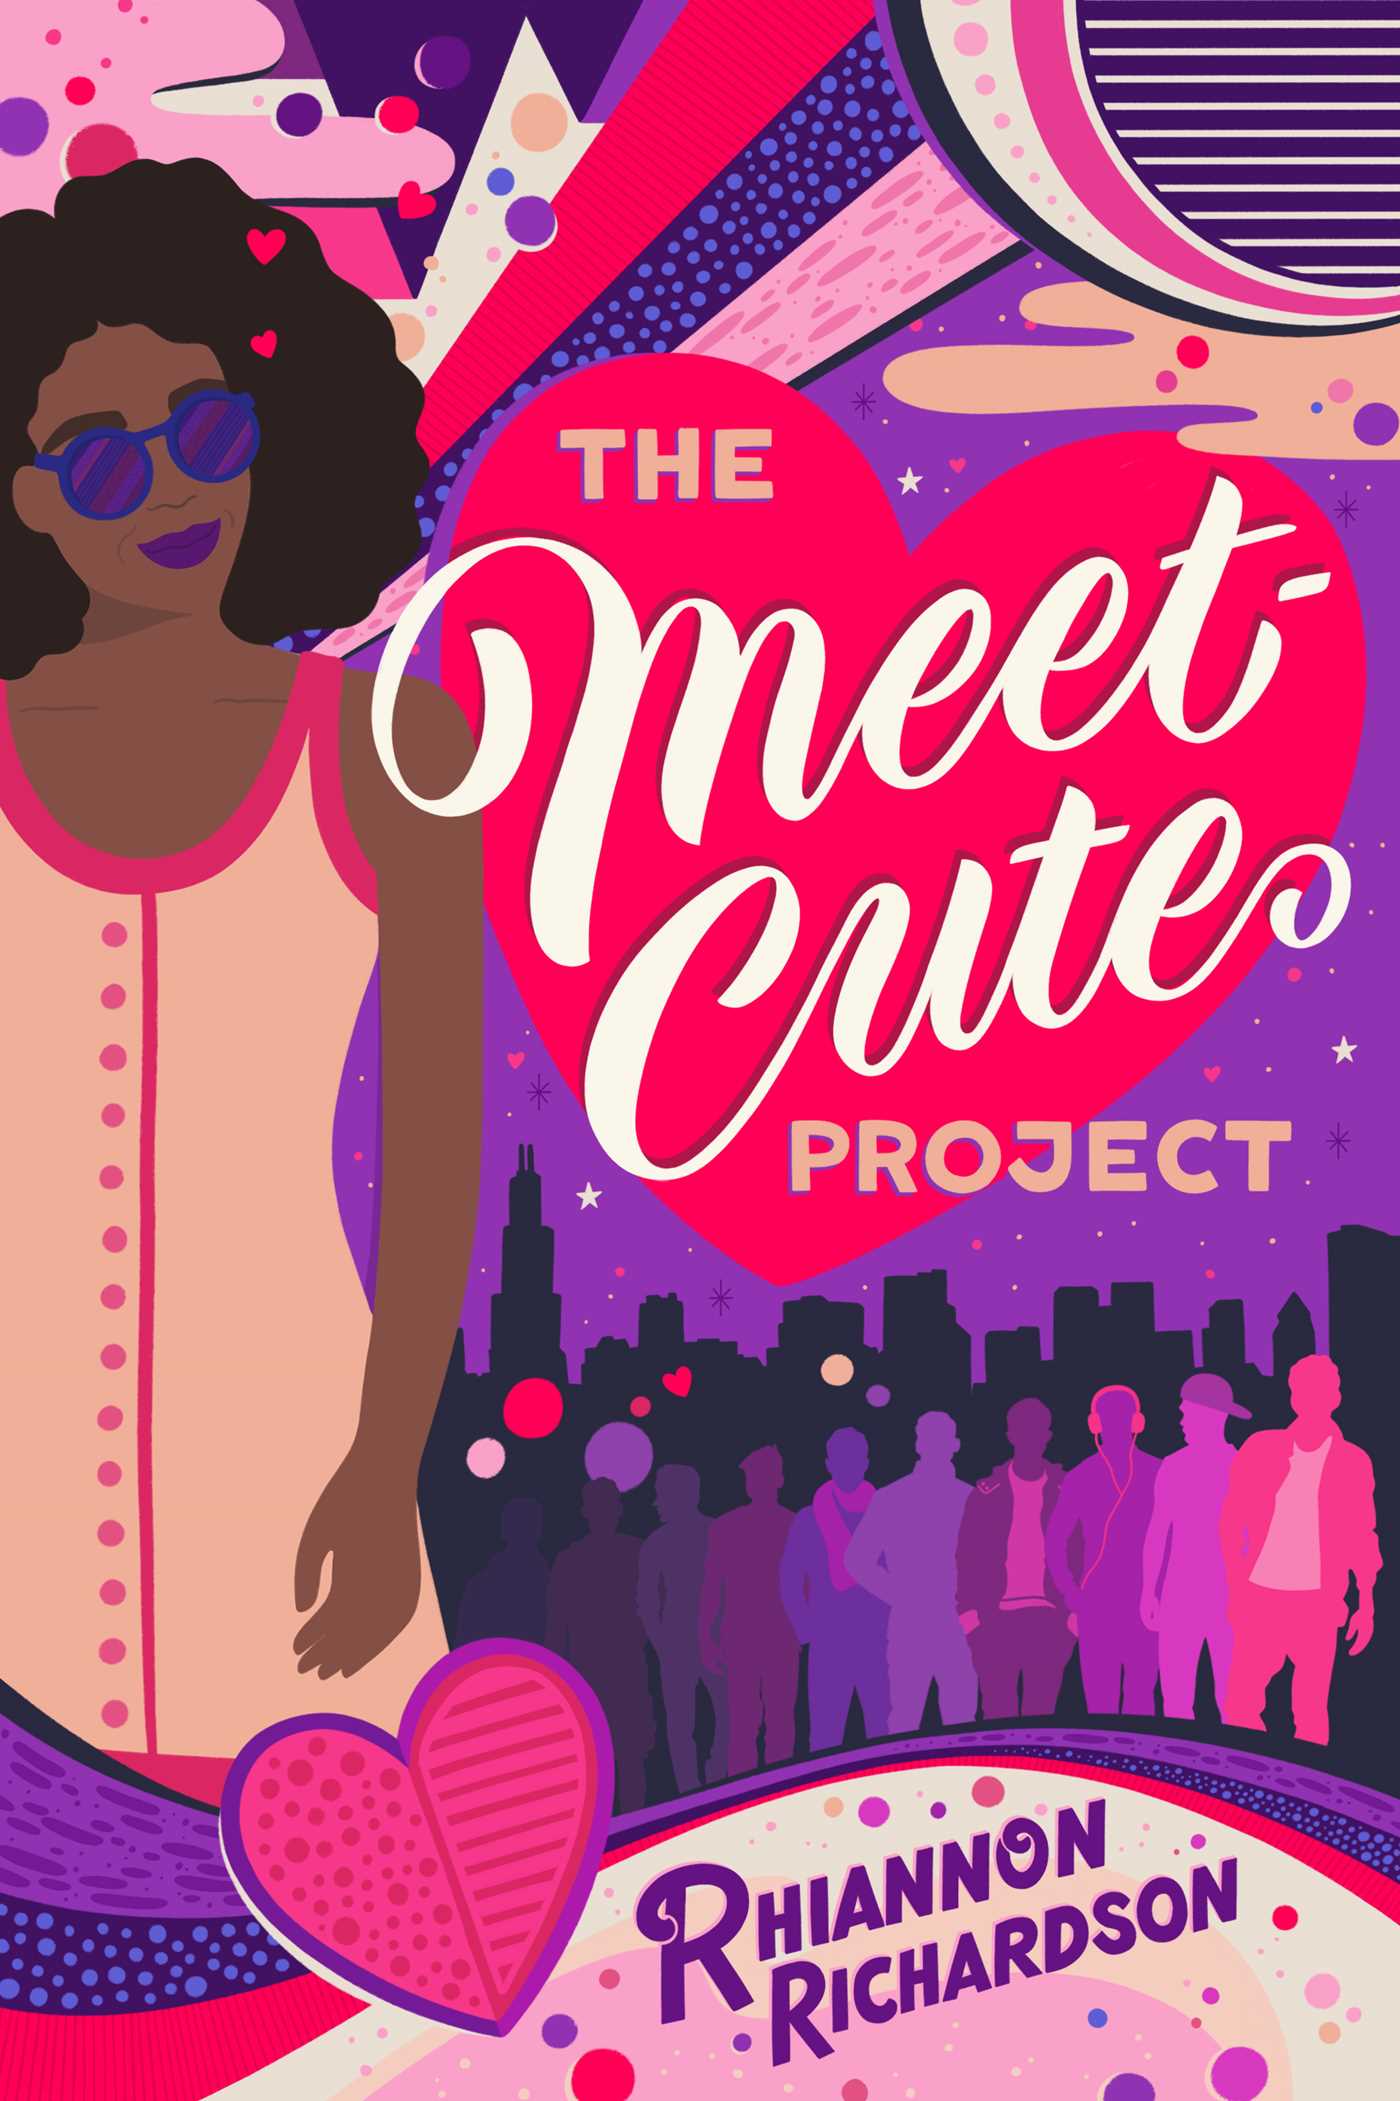 Image for "The Meet-Cute Project"